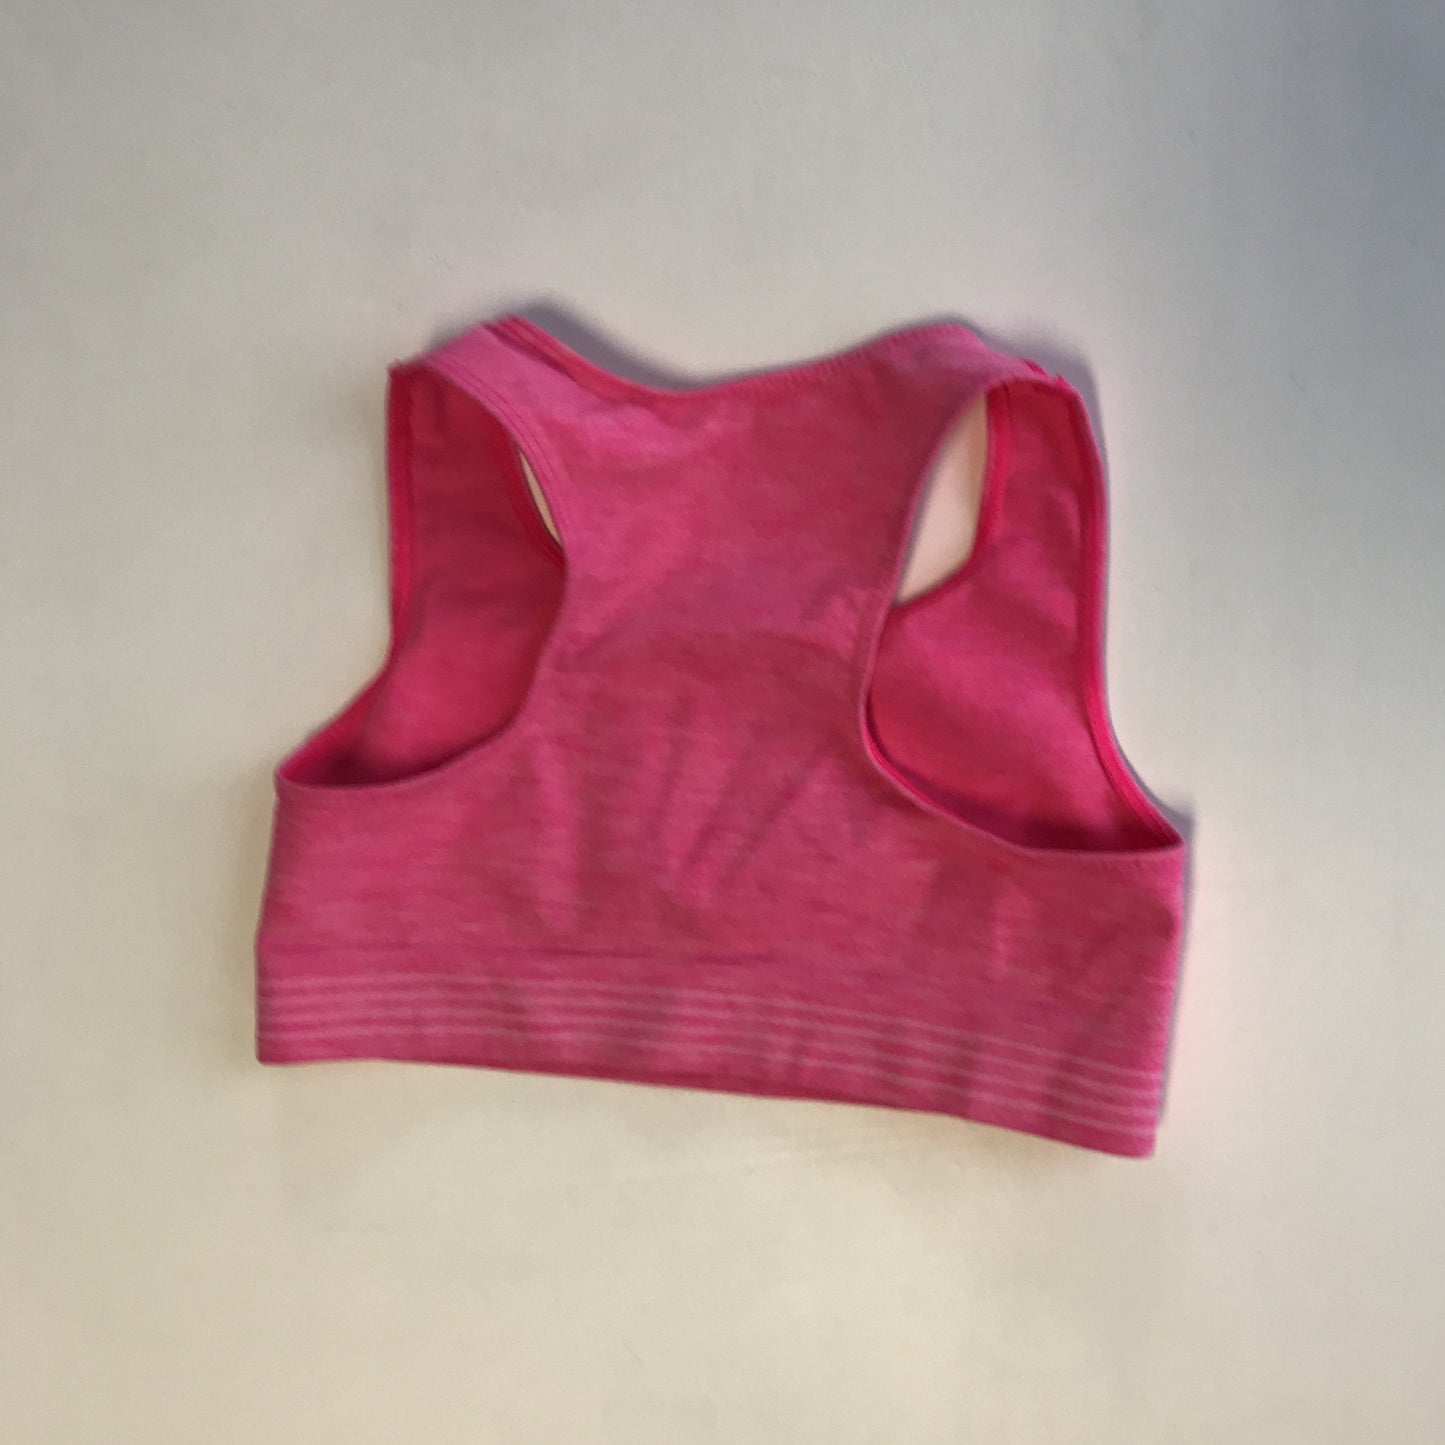 Sports Top - Pink Cropped Top - Age 6